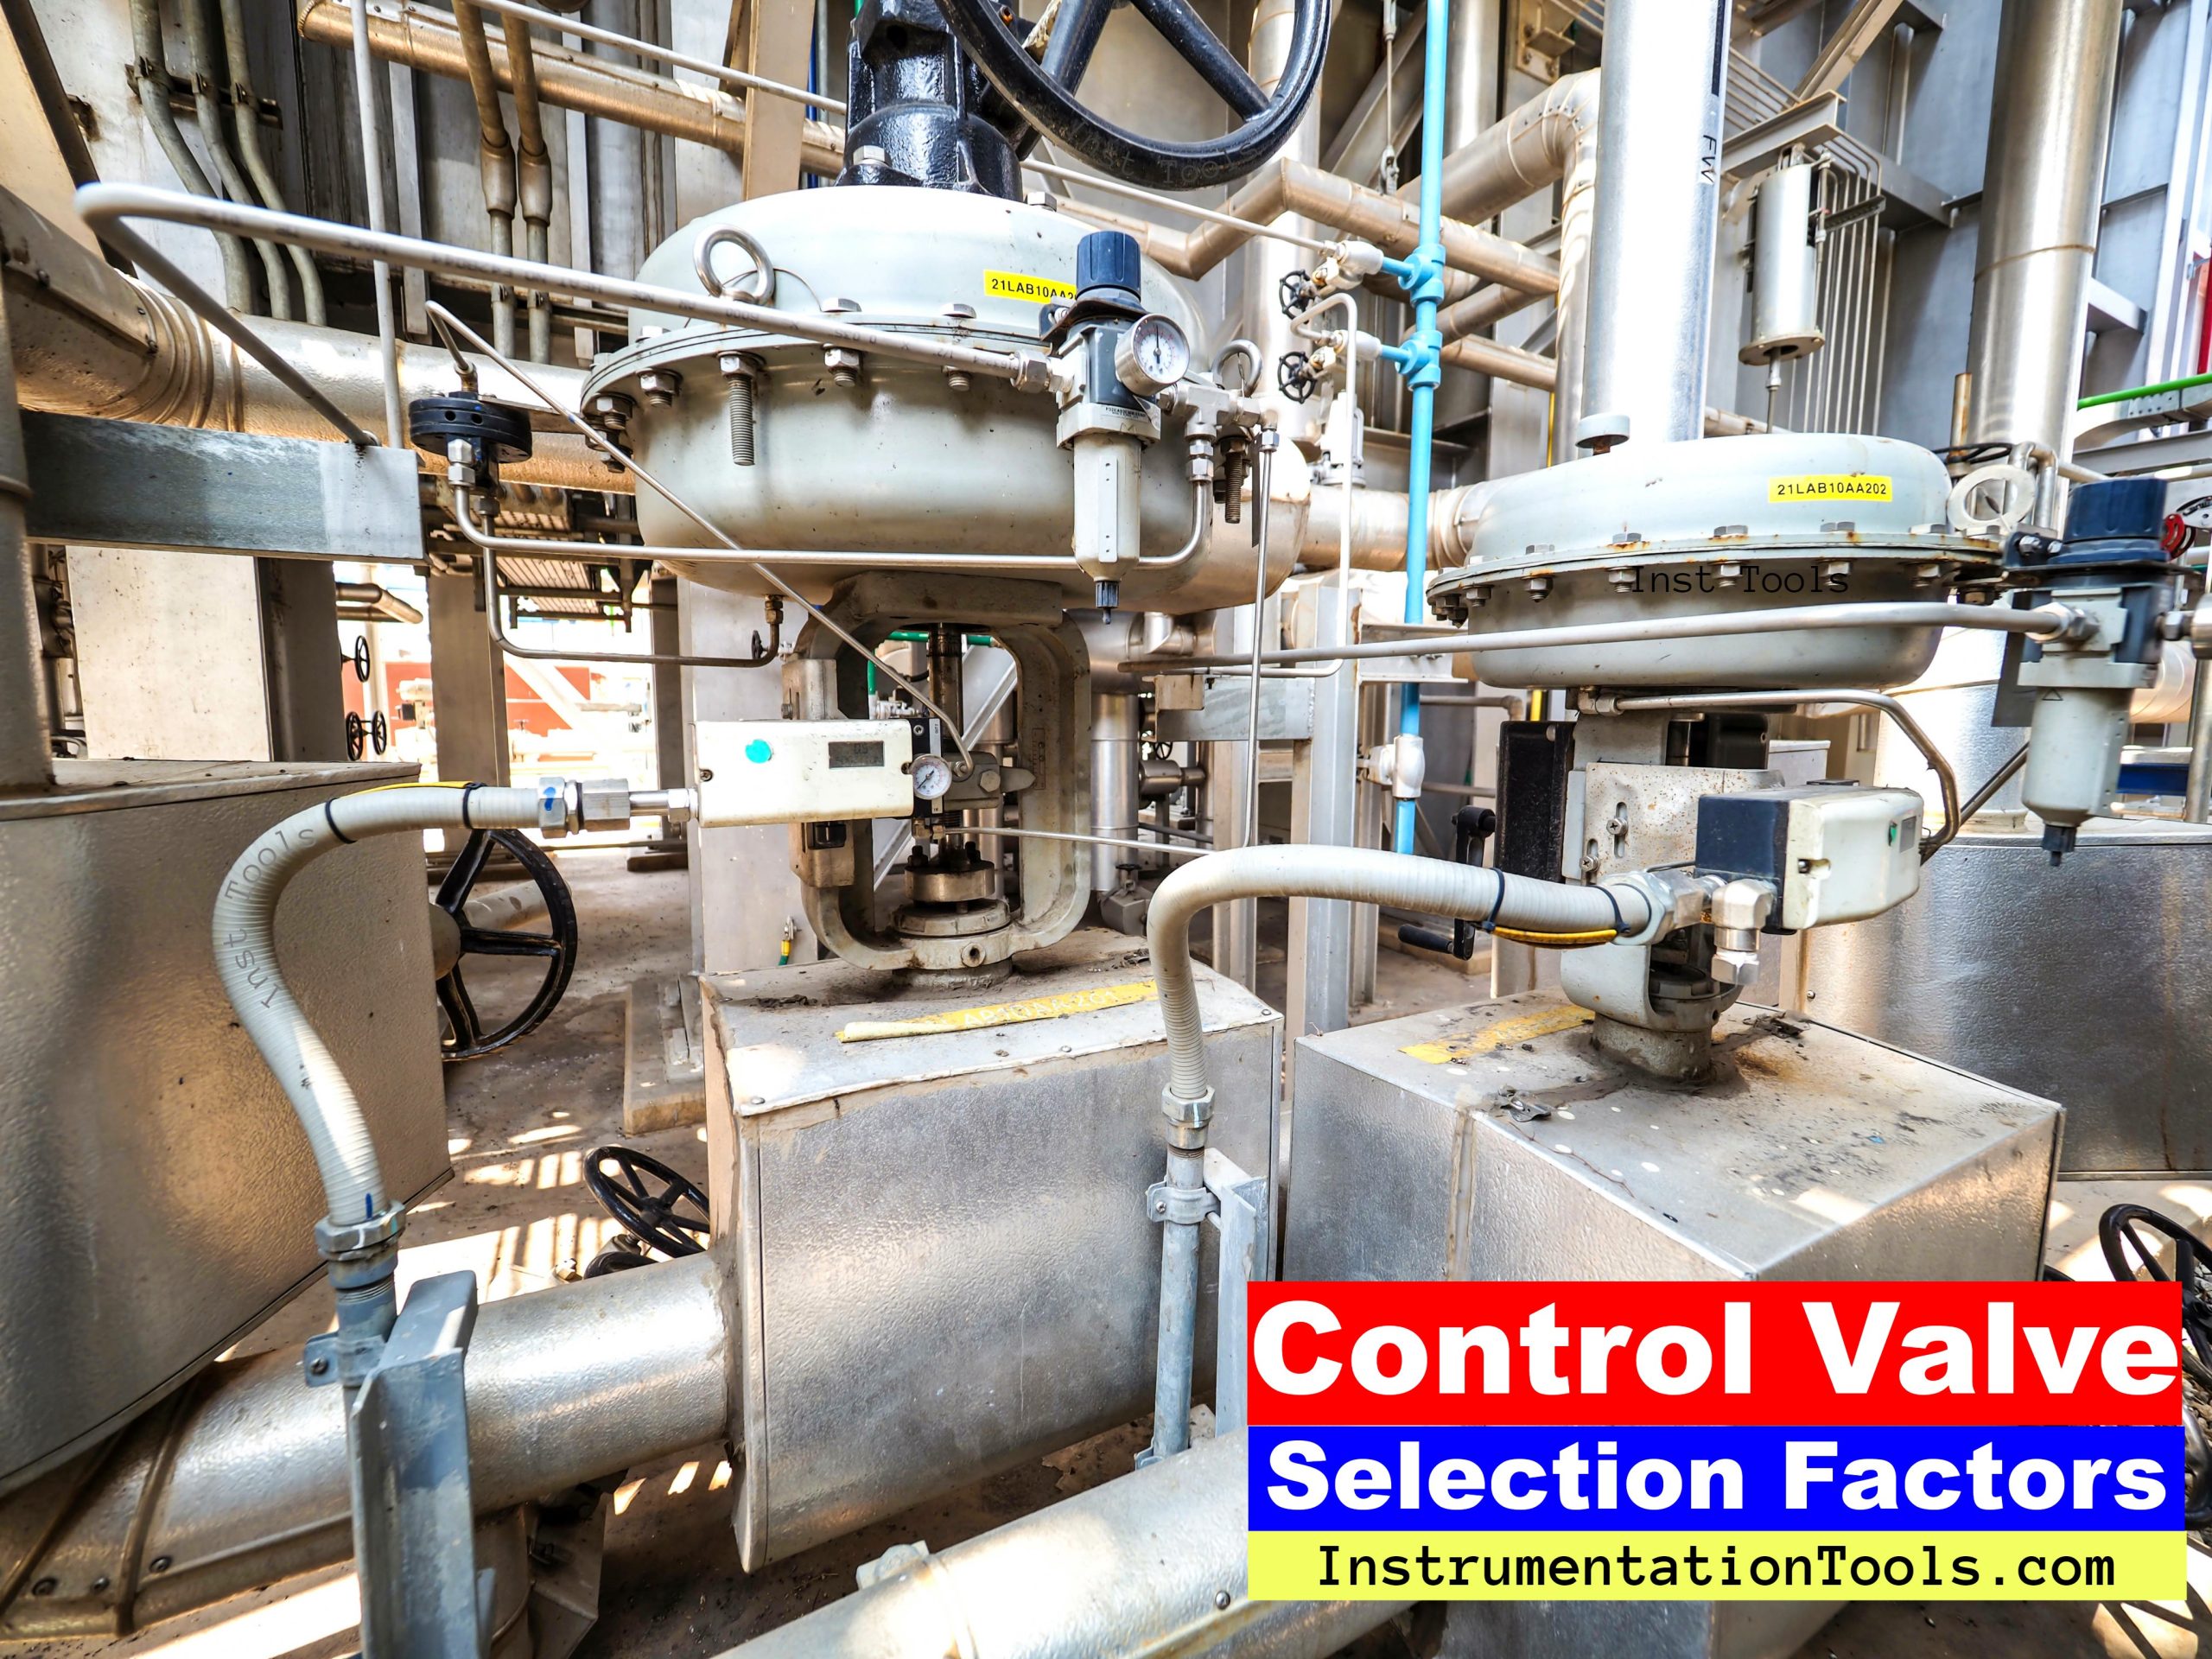 Control Valve in Nutshell - Valve Design and Selection Factors